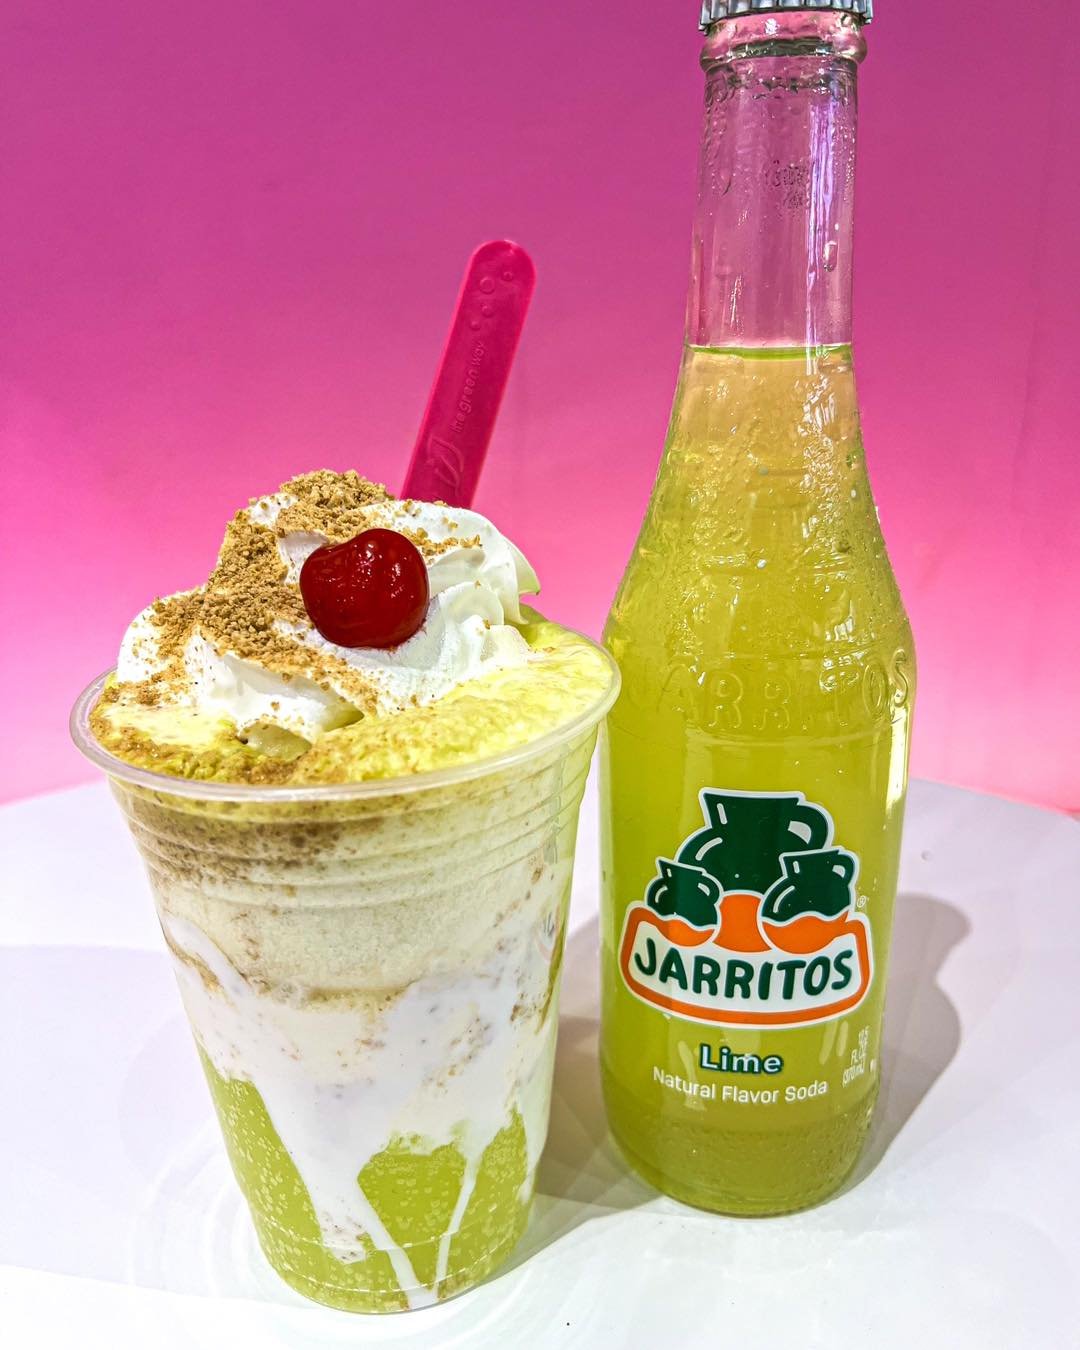 🍋💫 Elevate your Friday with our Lime Jarritos Float&mdash;cheesecake froyo blissfully merged with Jarritos lime soda, topped with whipped cream, graham cracker crumbs, and a cherry. 🍒 Embrace the weekend with a fusion that&rsquo;s sweet, tart, and